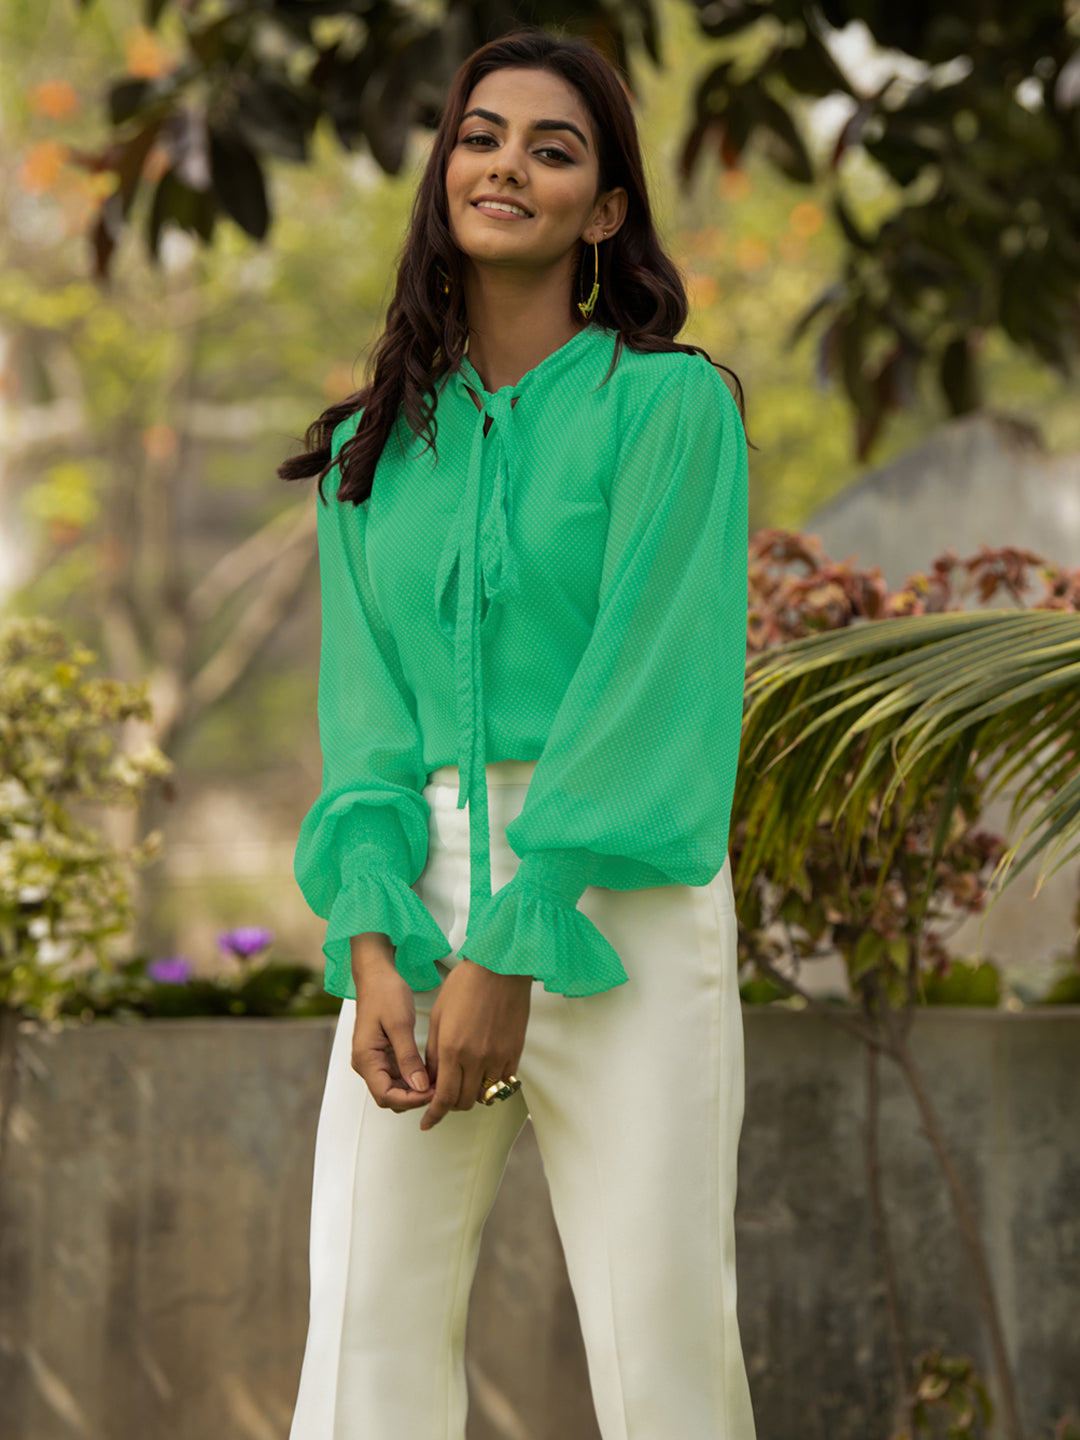 Stylish White Trousers and Green Shirt